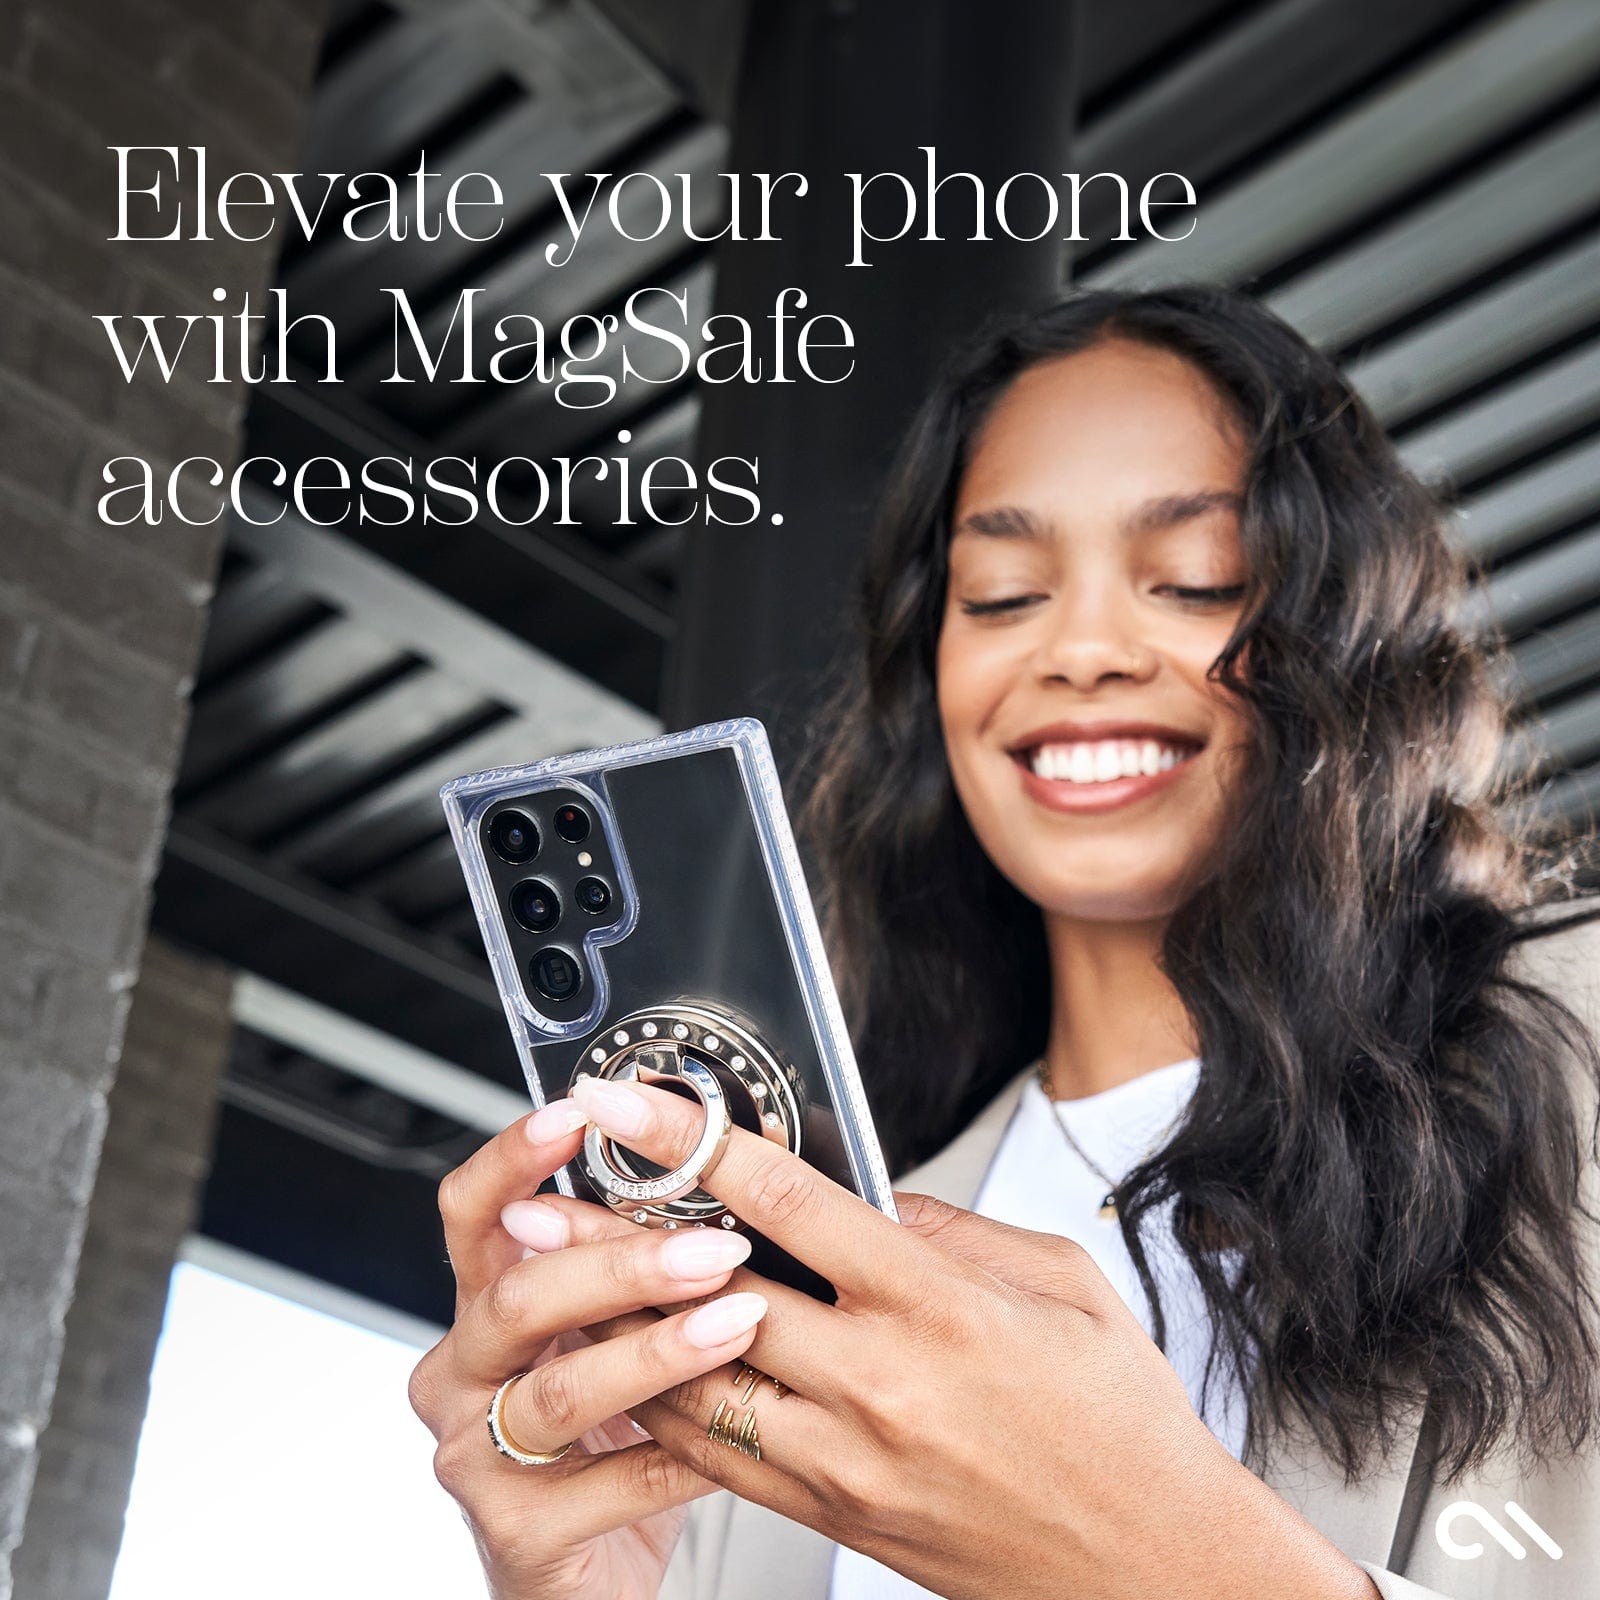 ELEVATE YOUR PHONE WITH MAGSAFE ACCESSORIES